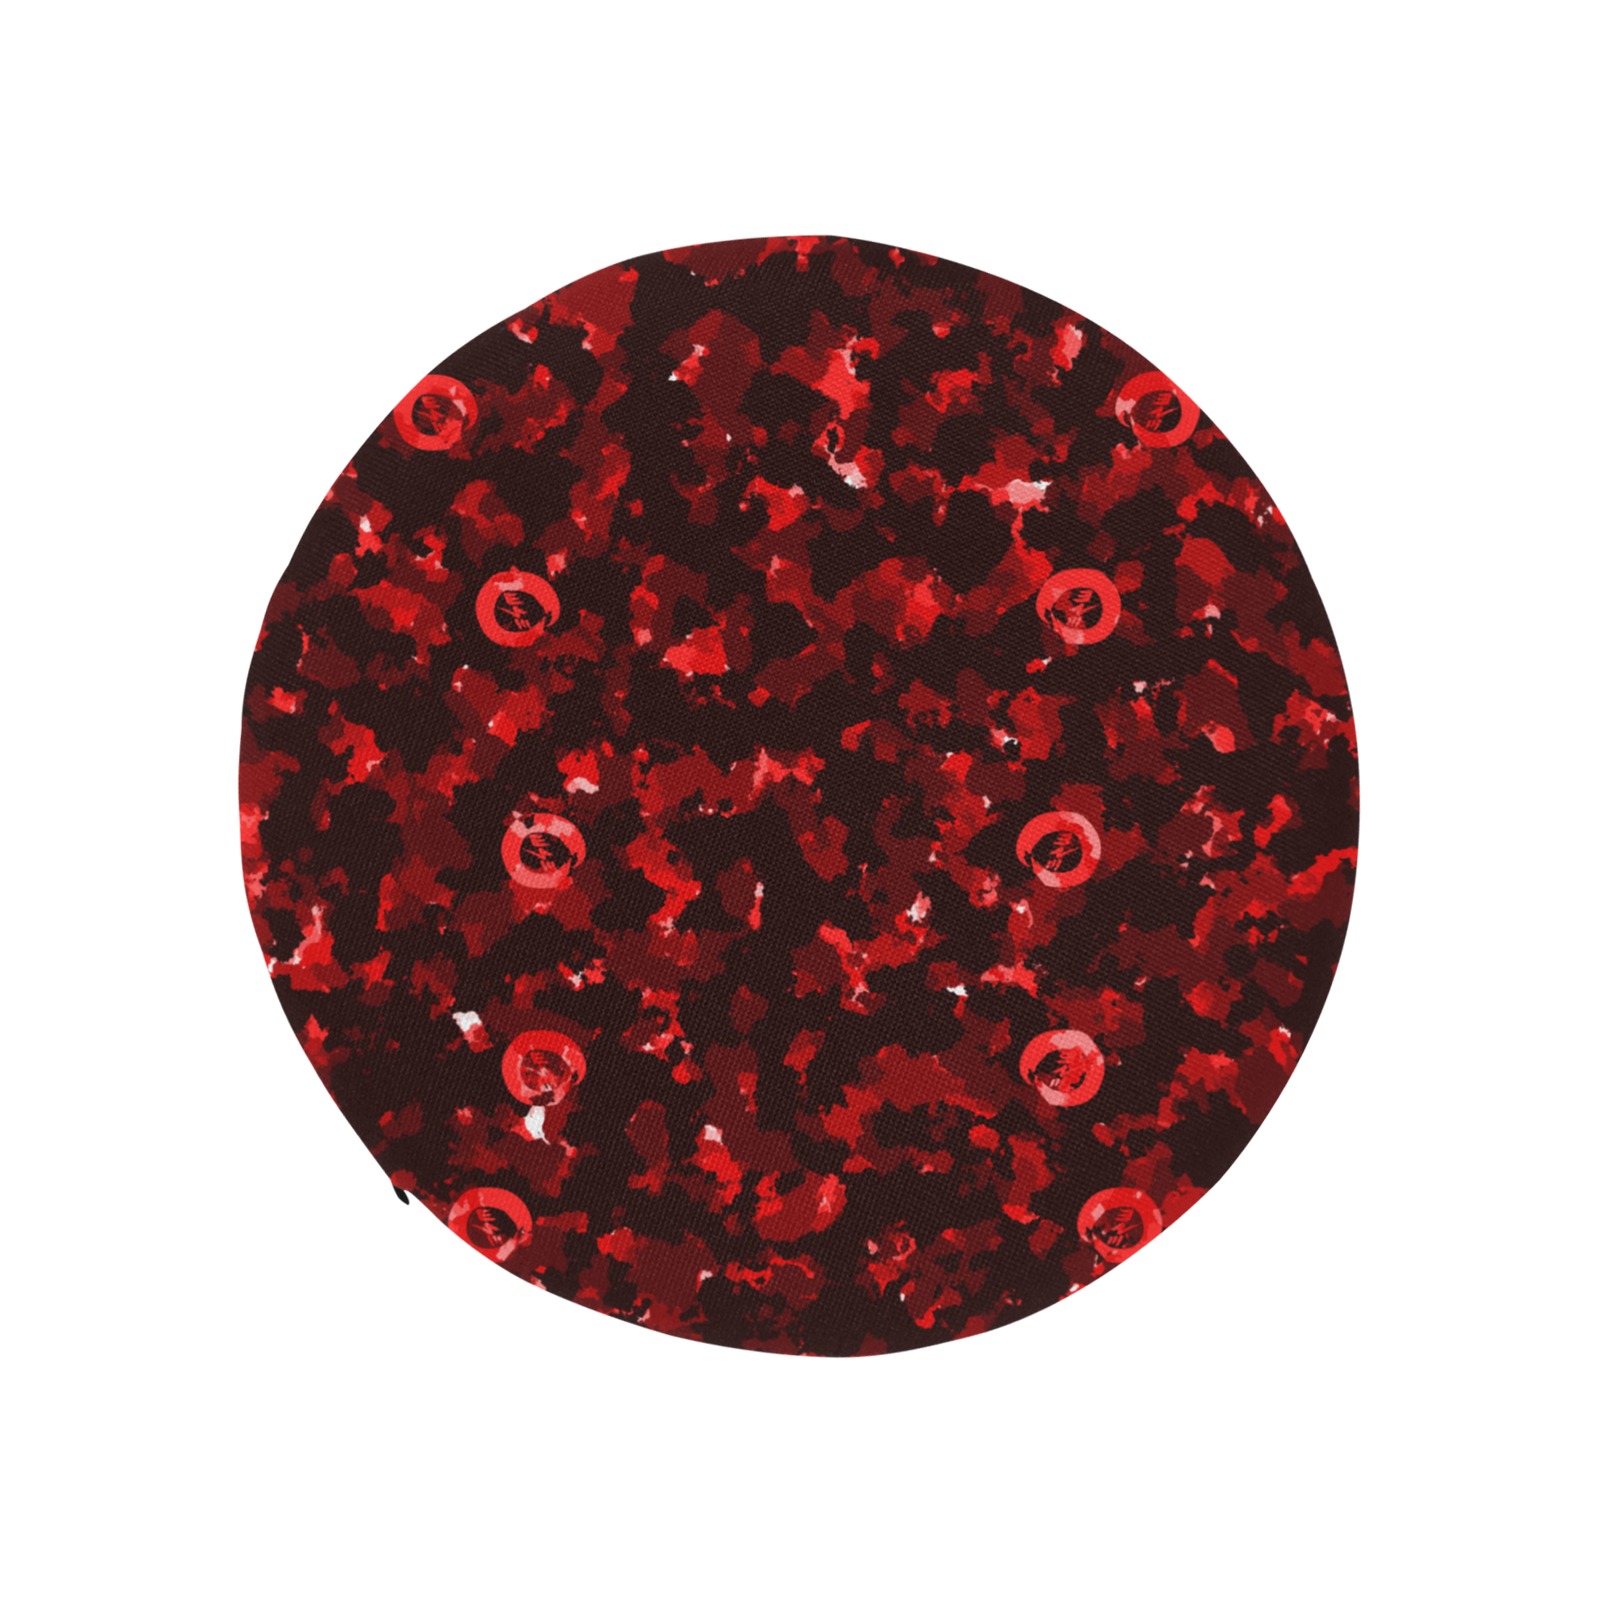 New Project (2) (2) Round Seat Cushion